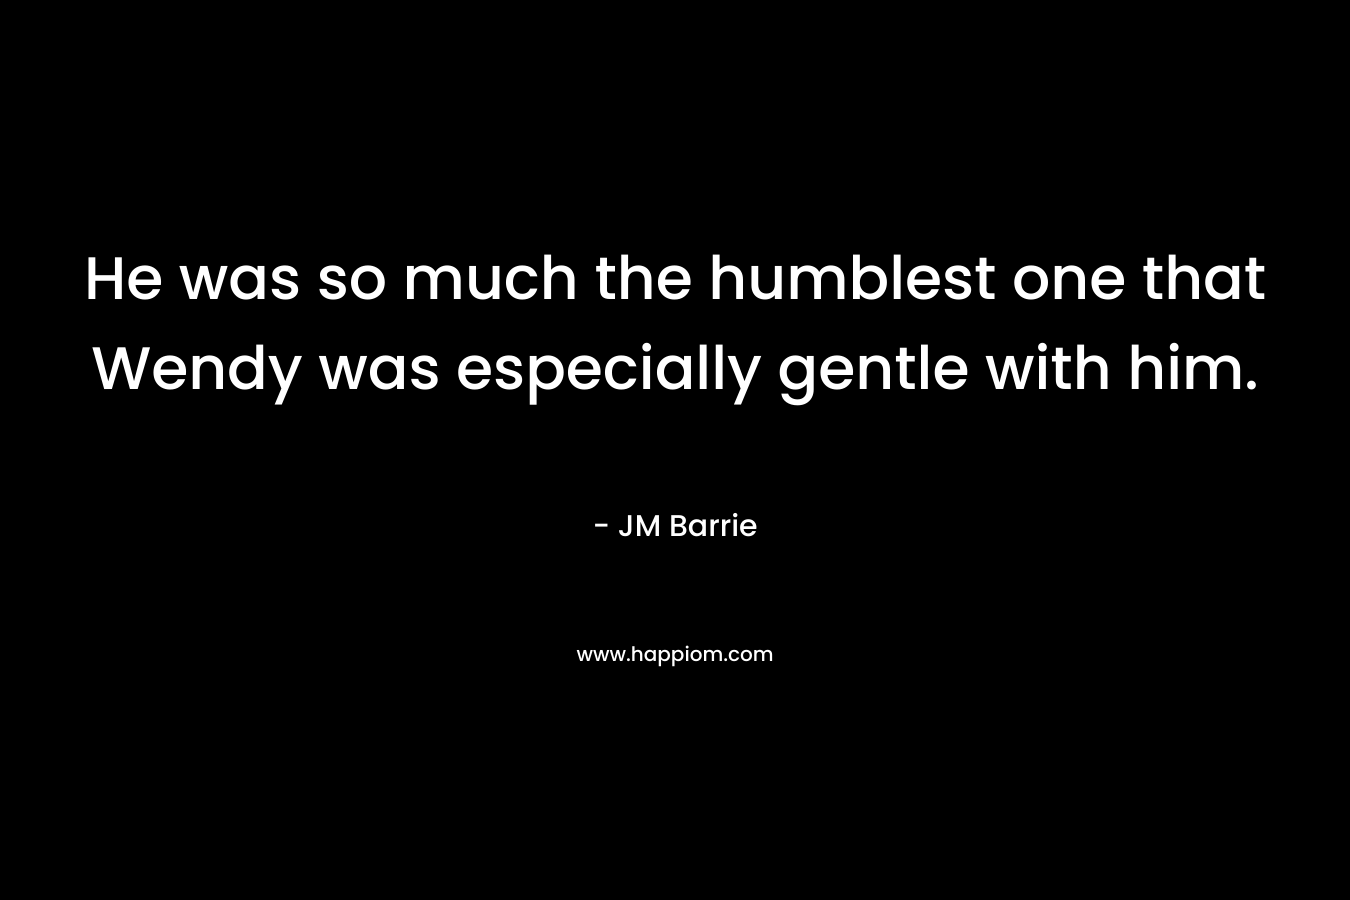 He was so much the humblest one that Wendy was especially gentle with him. – JM Barrie